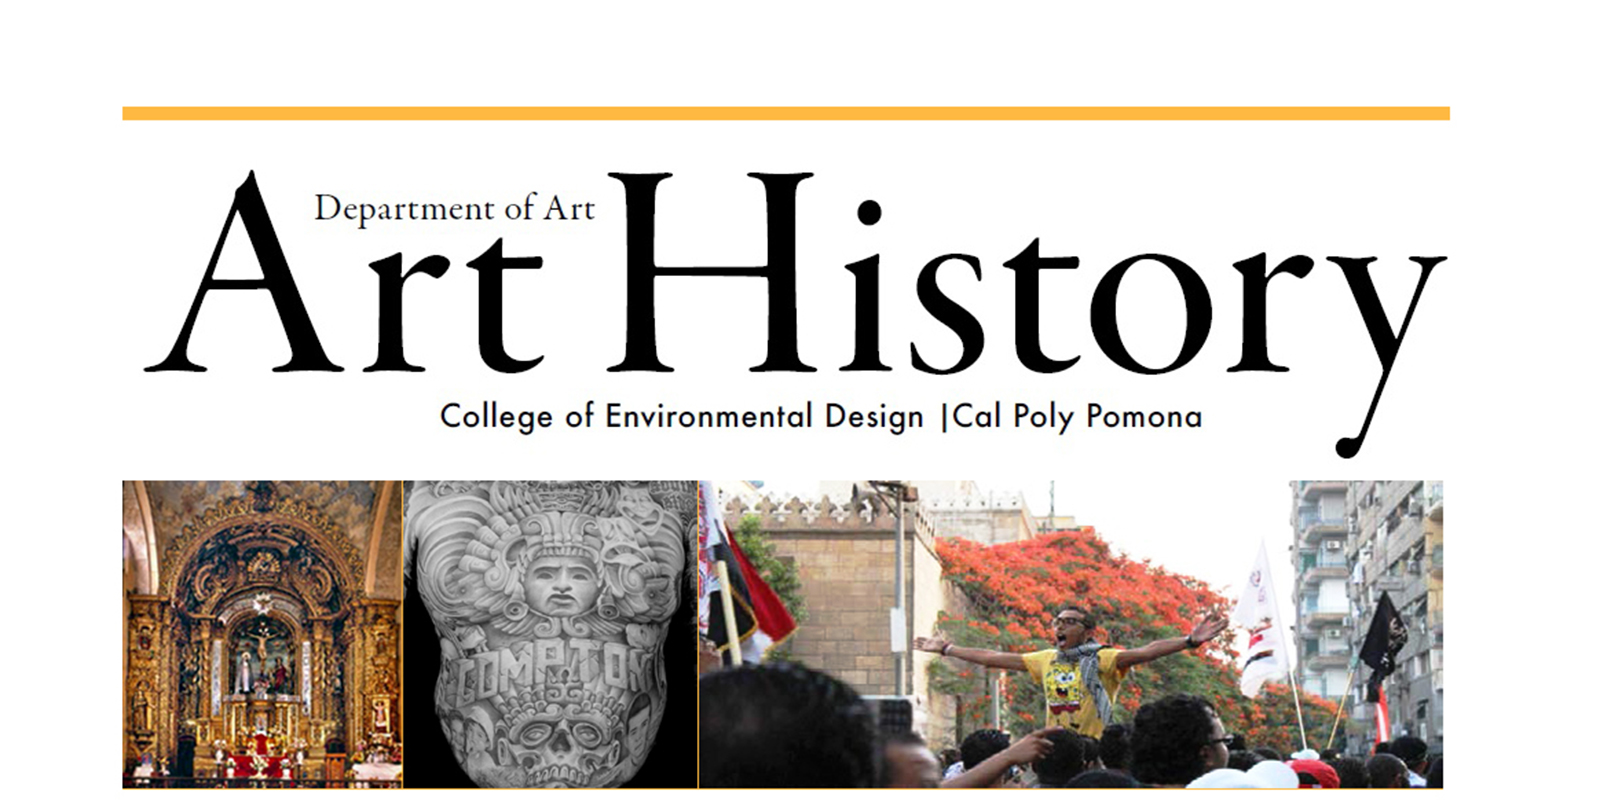 College of Environmental Design | Cal Poly Pomona.  Art History Issue No.2 | 2017-18 | In this Edition, Art History Senior Projects.  Playing with Eroticism | Fashion via the Arab Spring The Christian Temple of the Sun, Chicano ink + more.  News Graduating seniors | Alumni on the move Programming the arts in the Inland Empire